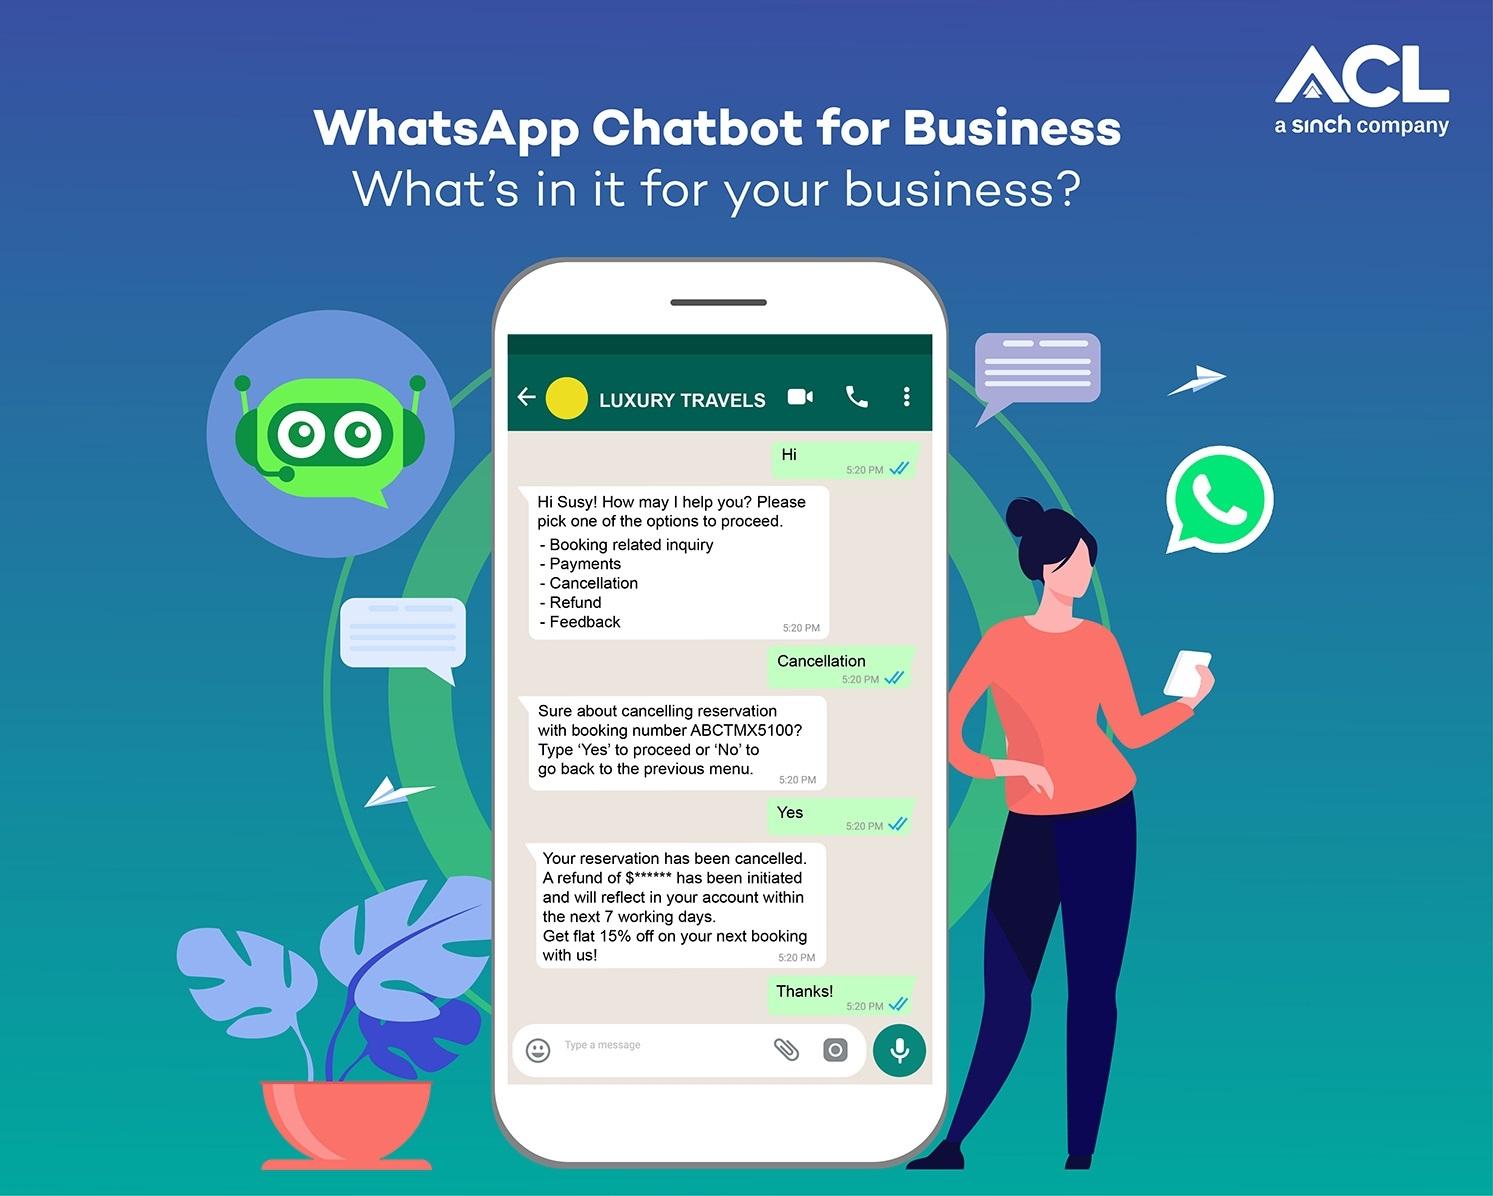 Whatsapp chatbot for business